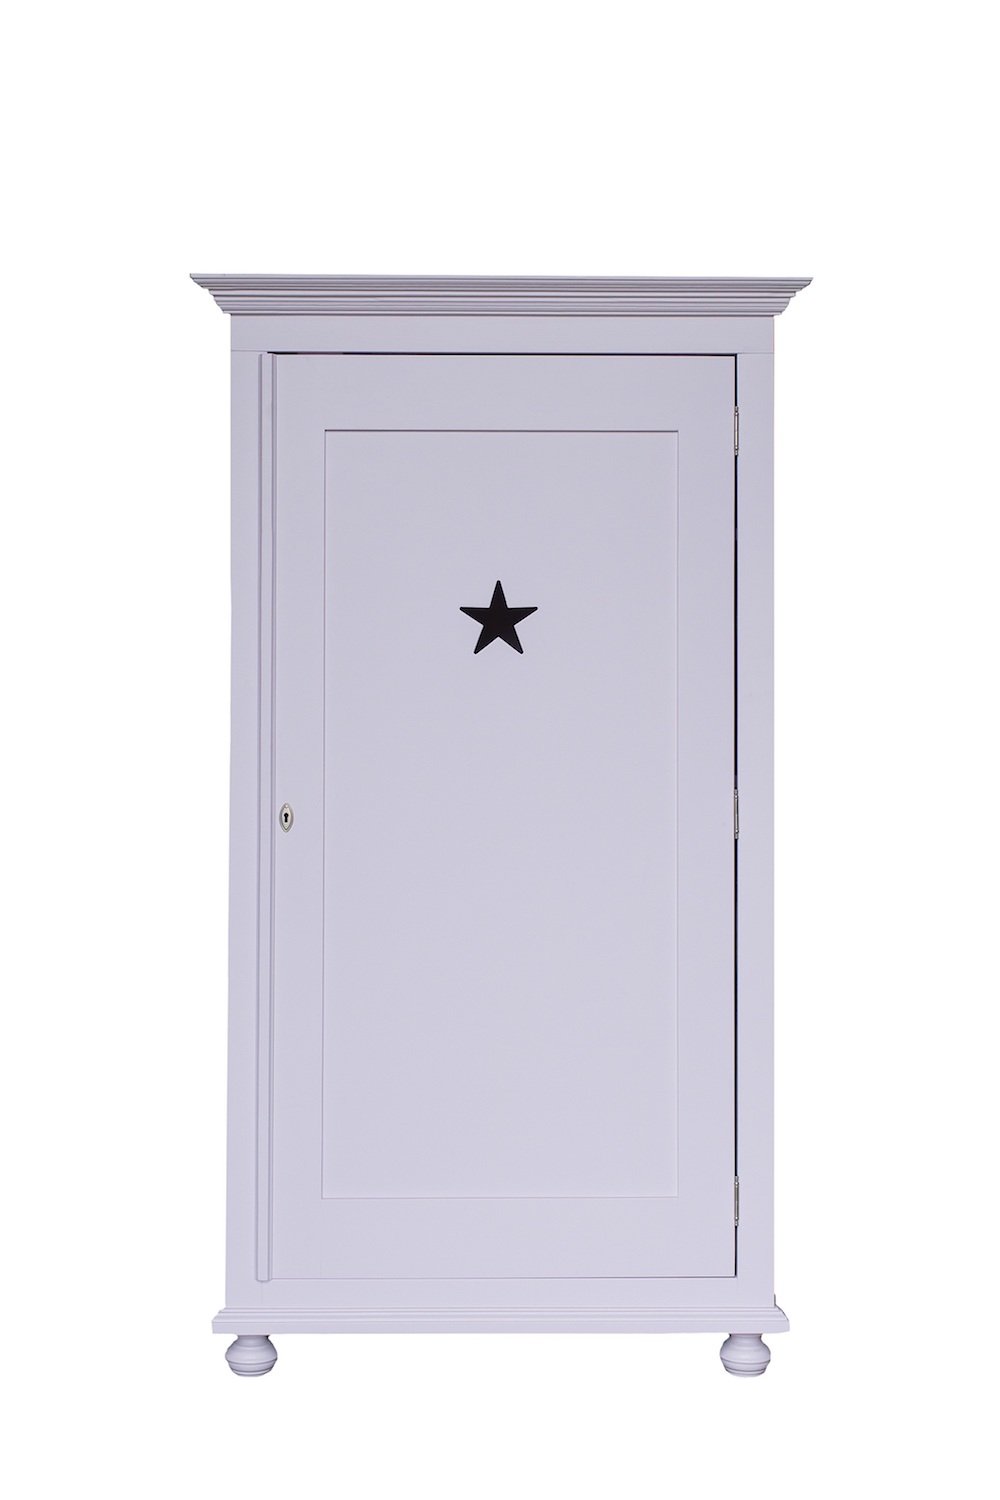 Styling ID Tips&trends Stijlvolle kinderkamers in pasteltinten commode camilla collection star purple